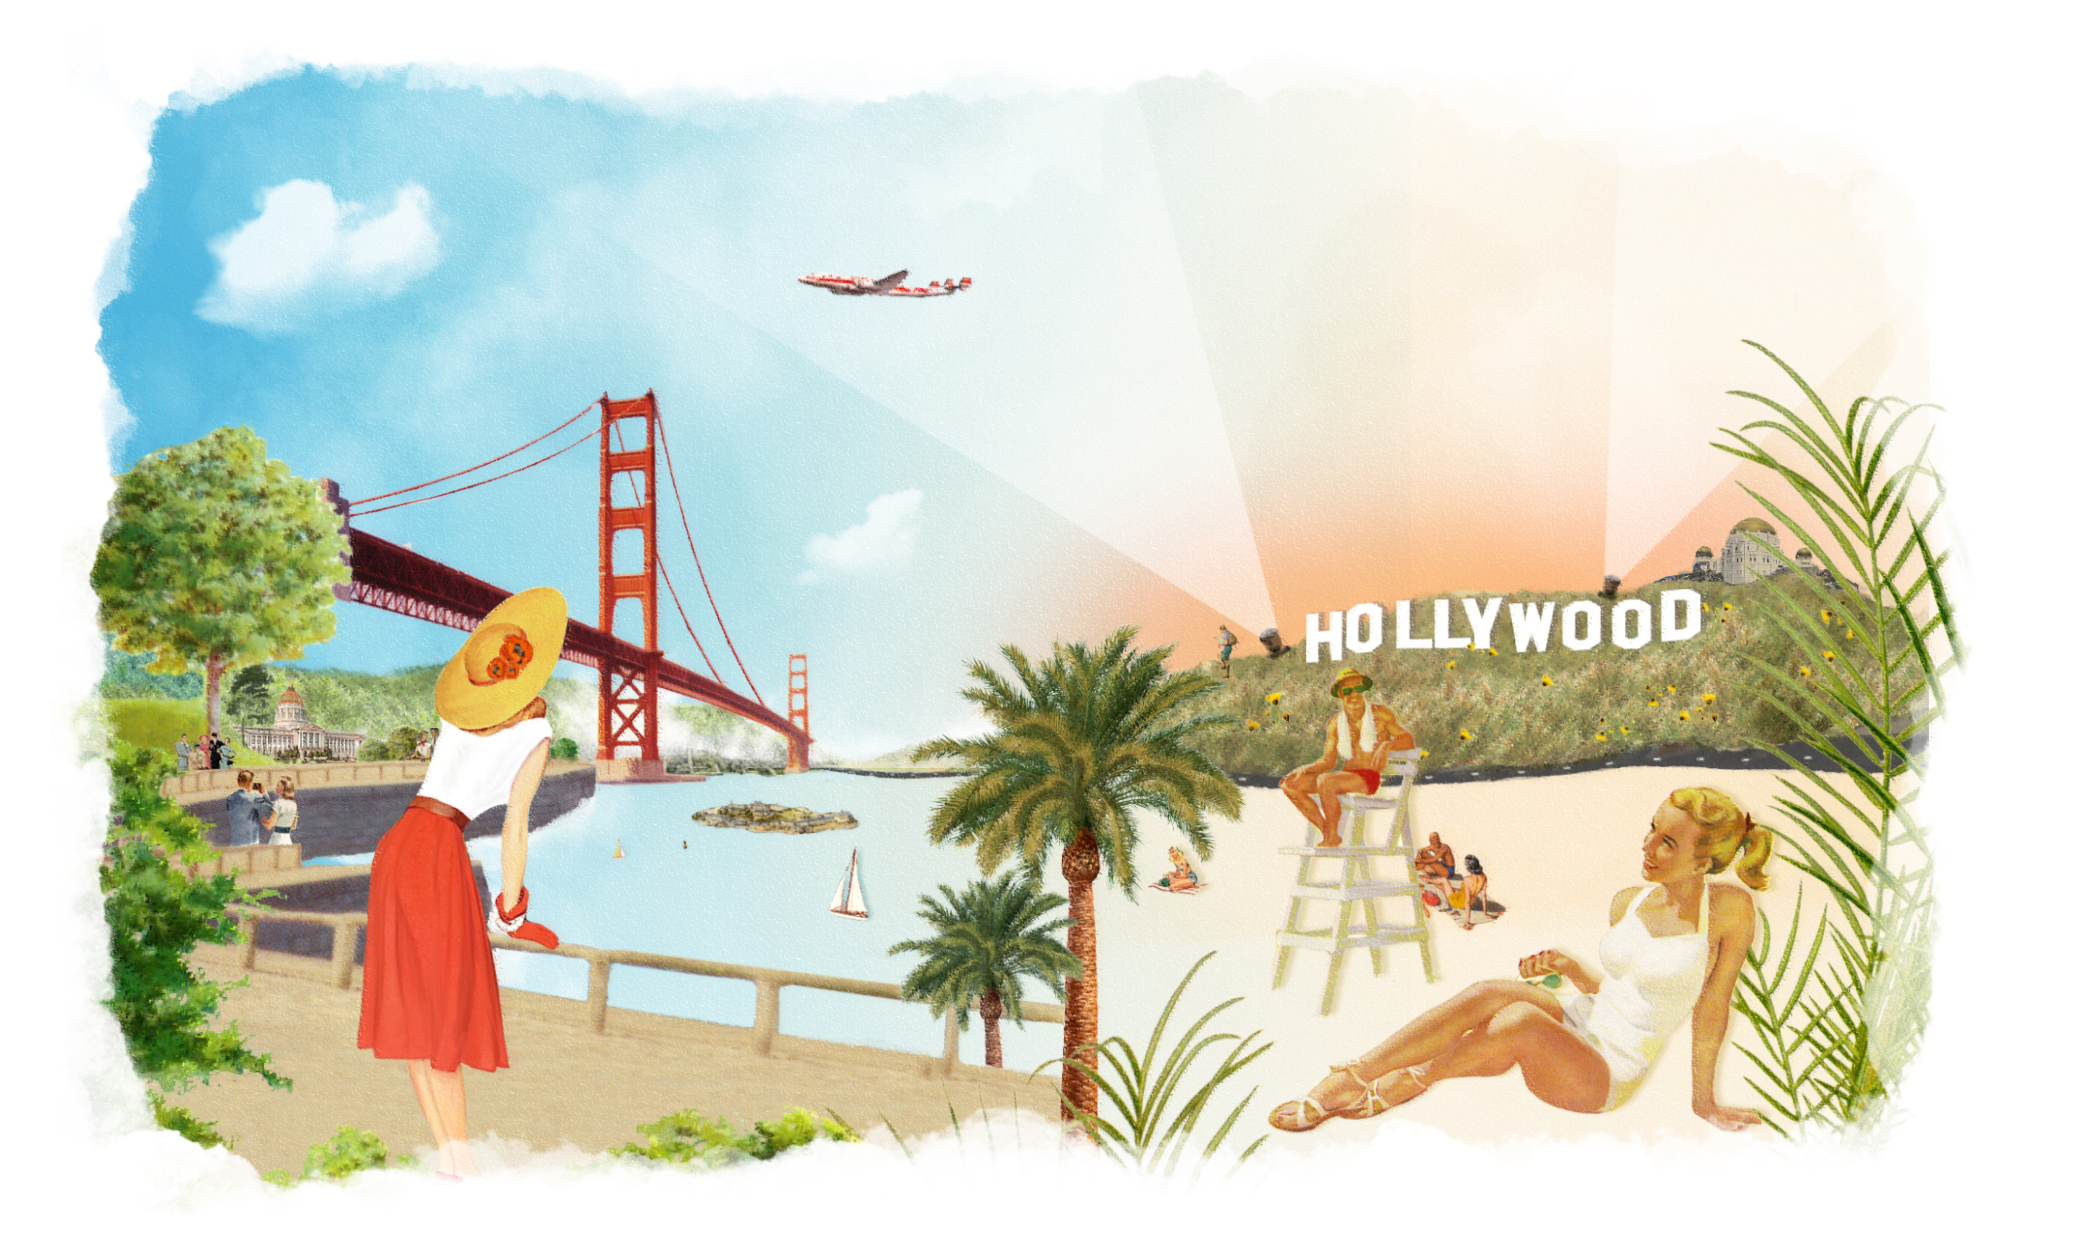 Illustration collage with images of San Francisco and Los Angeles